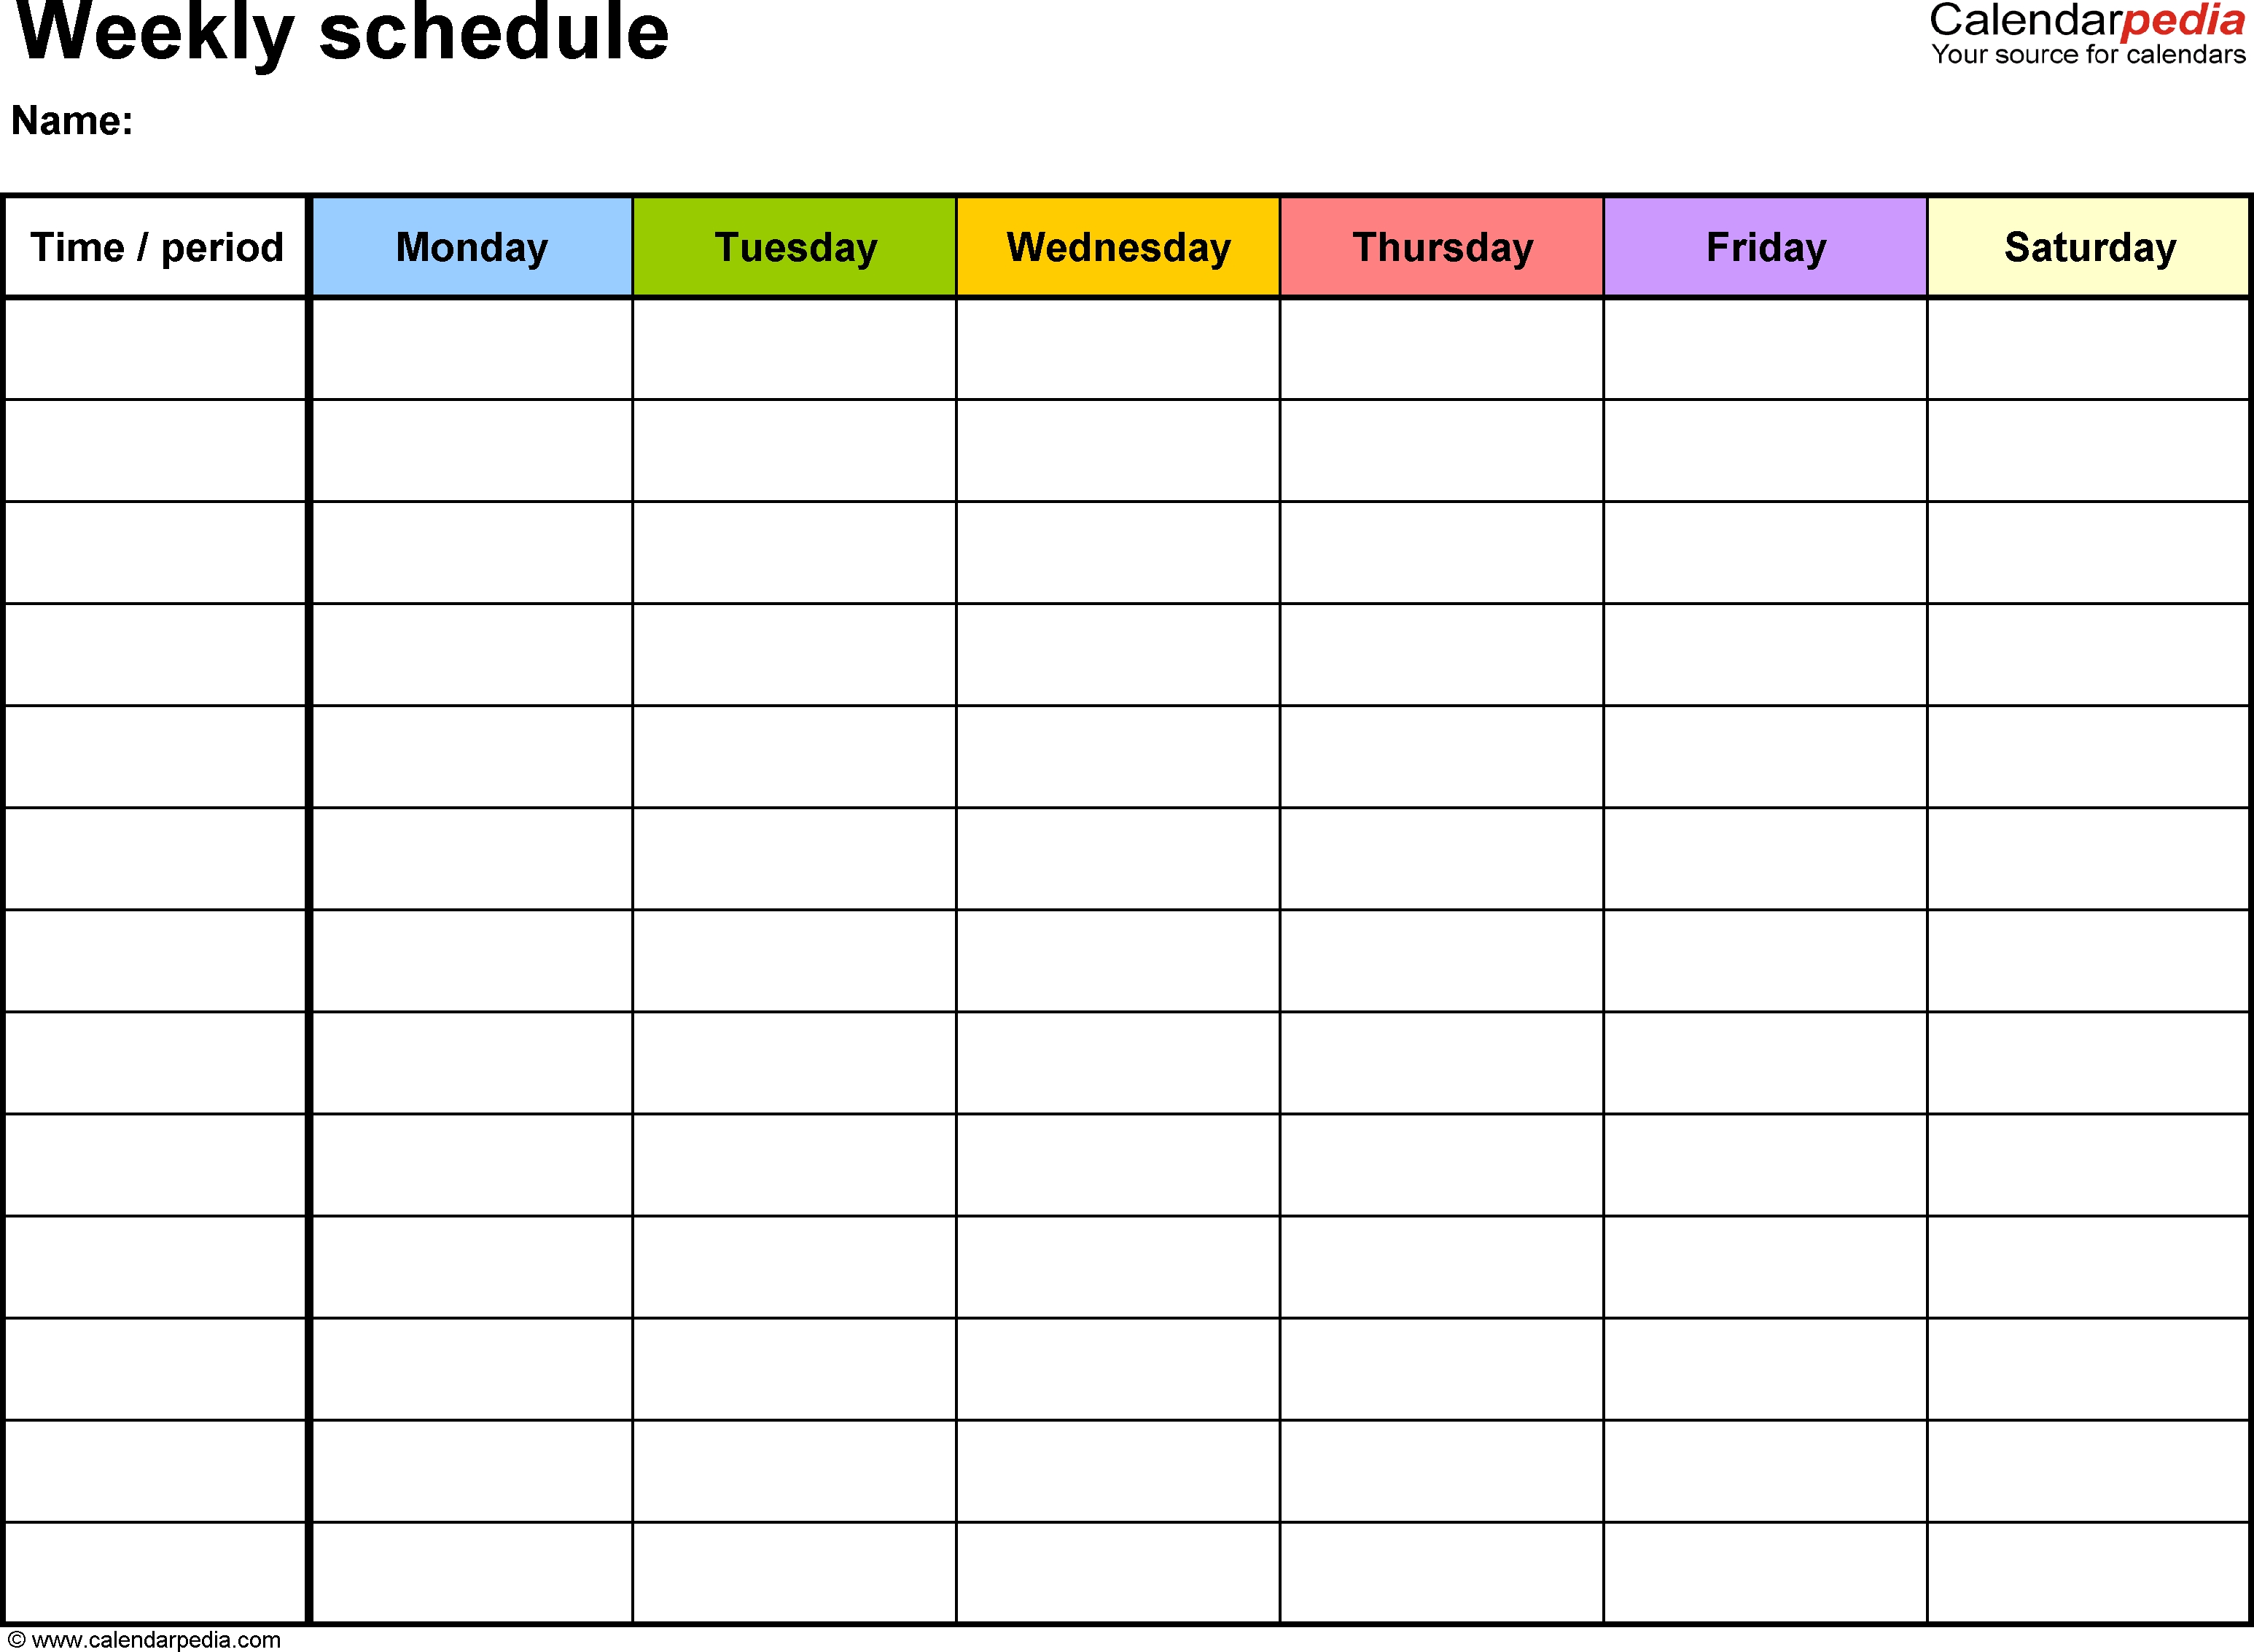 Free Weekly Schedule Templates For Word - 18 Templates-Blank Calendar Page Monday To Friday